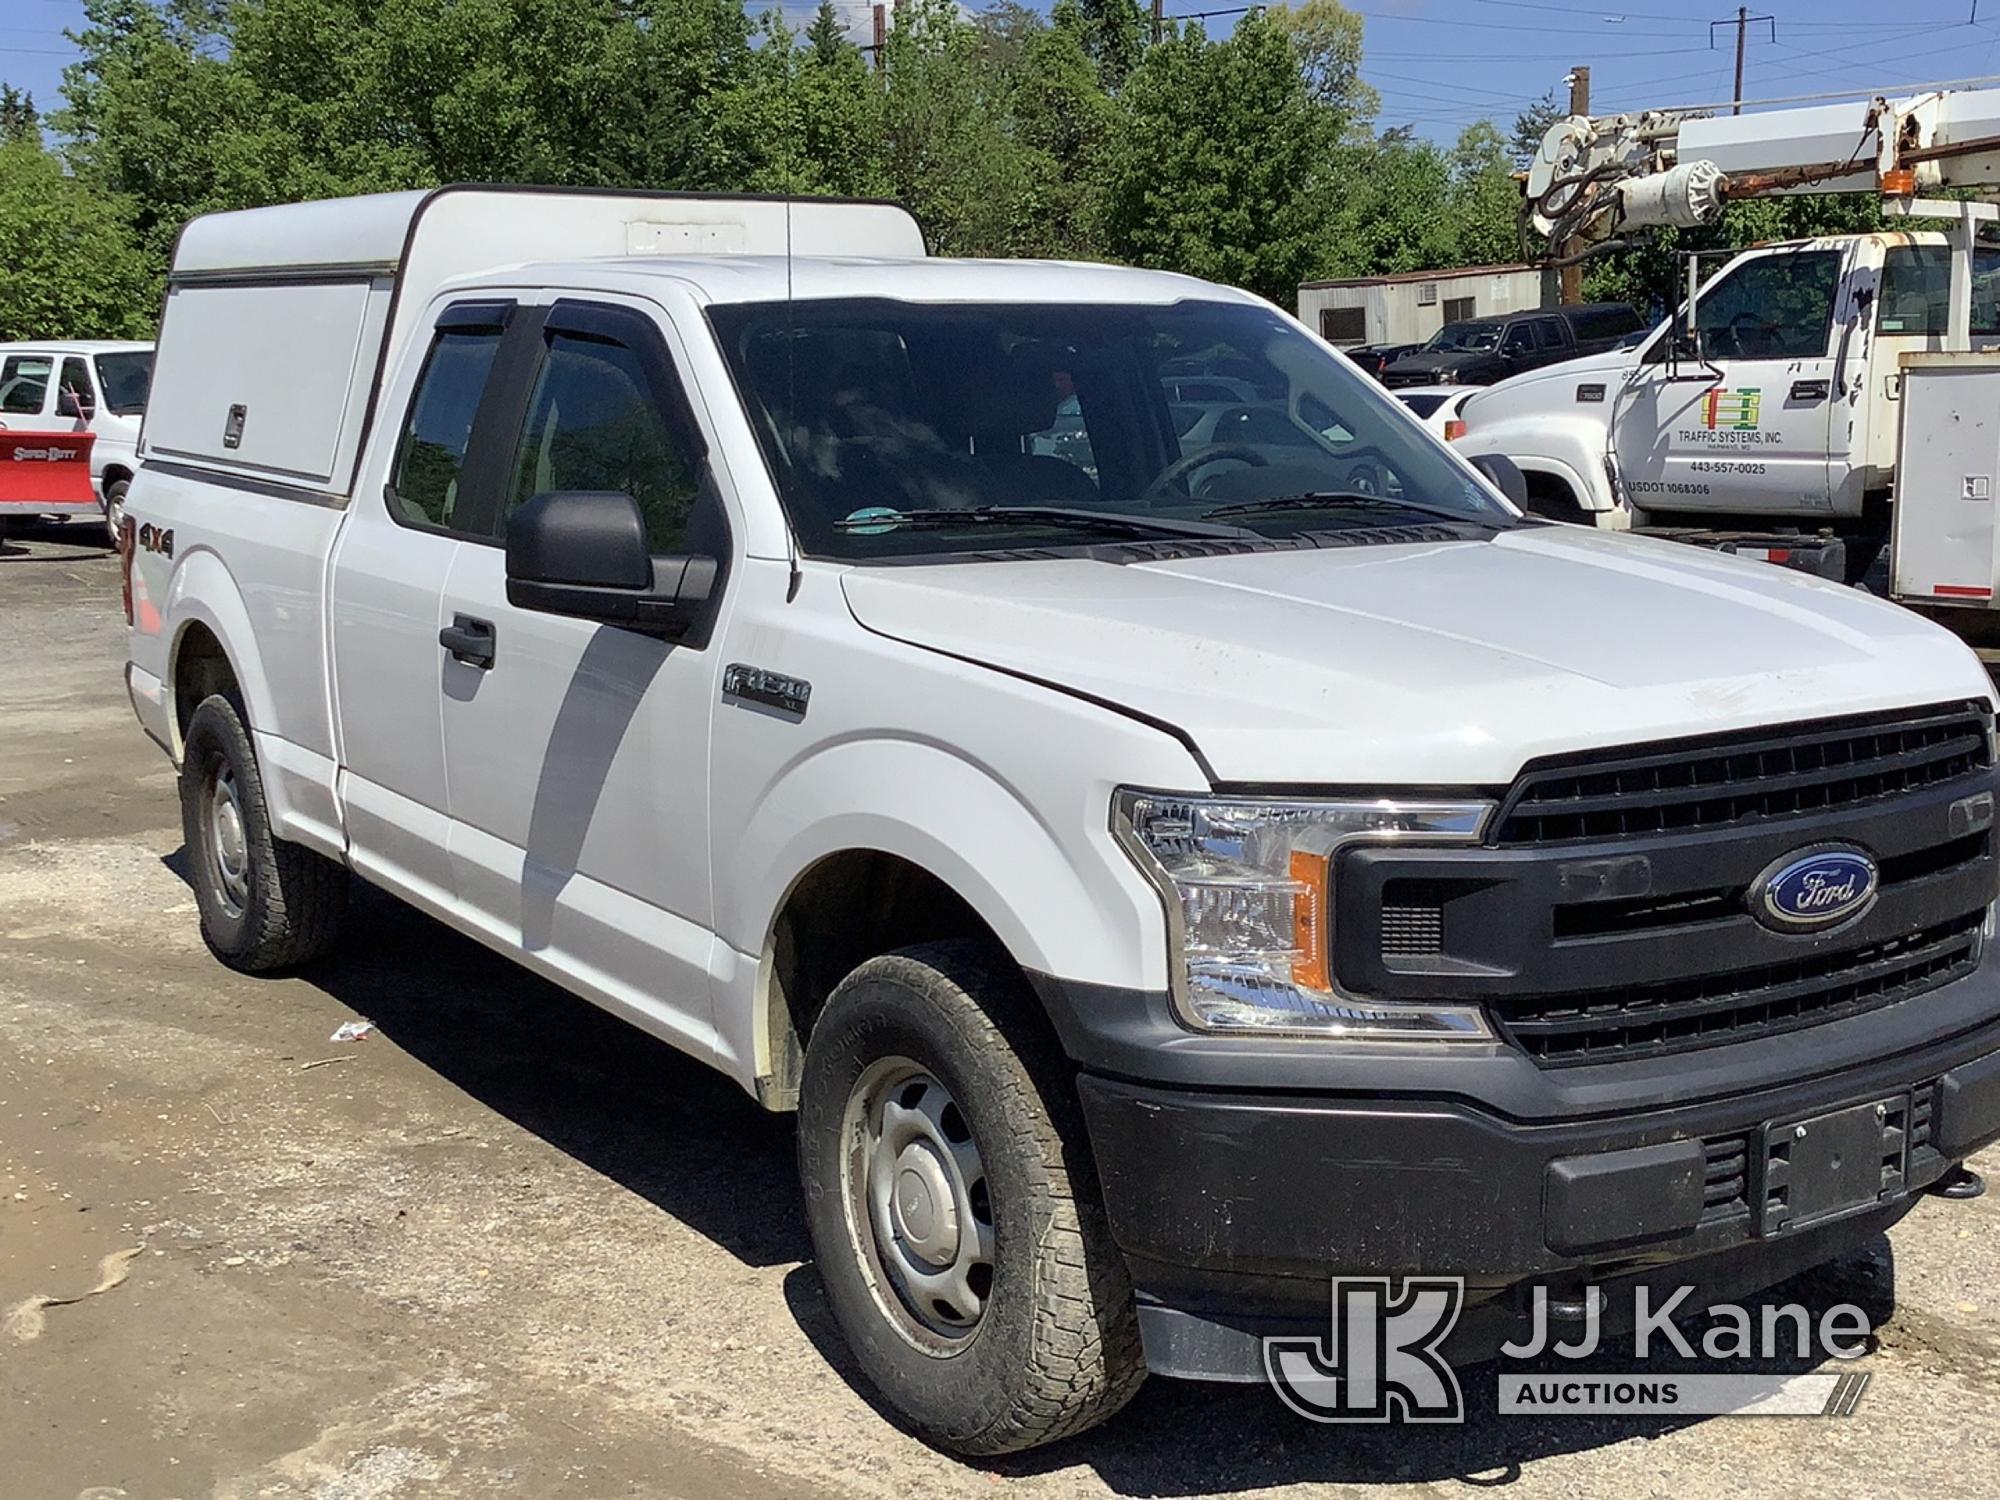 (Harmans, MD) 2018 Ford F150 4x4 Extended-Cab Pickup Truck Runs & Moves, Transmission Issues, Rust &